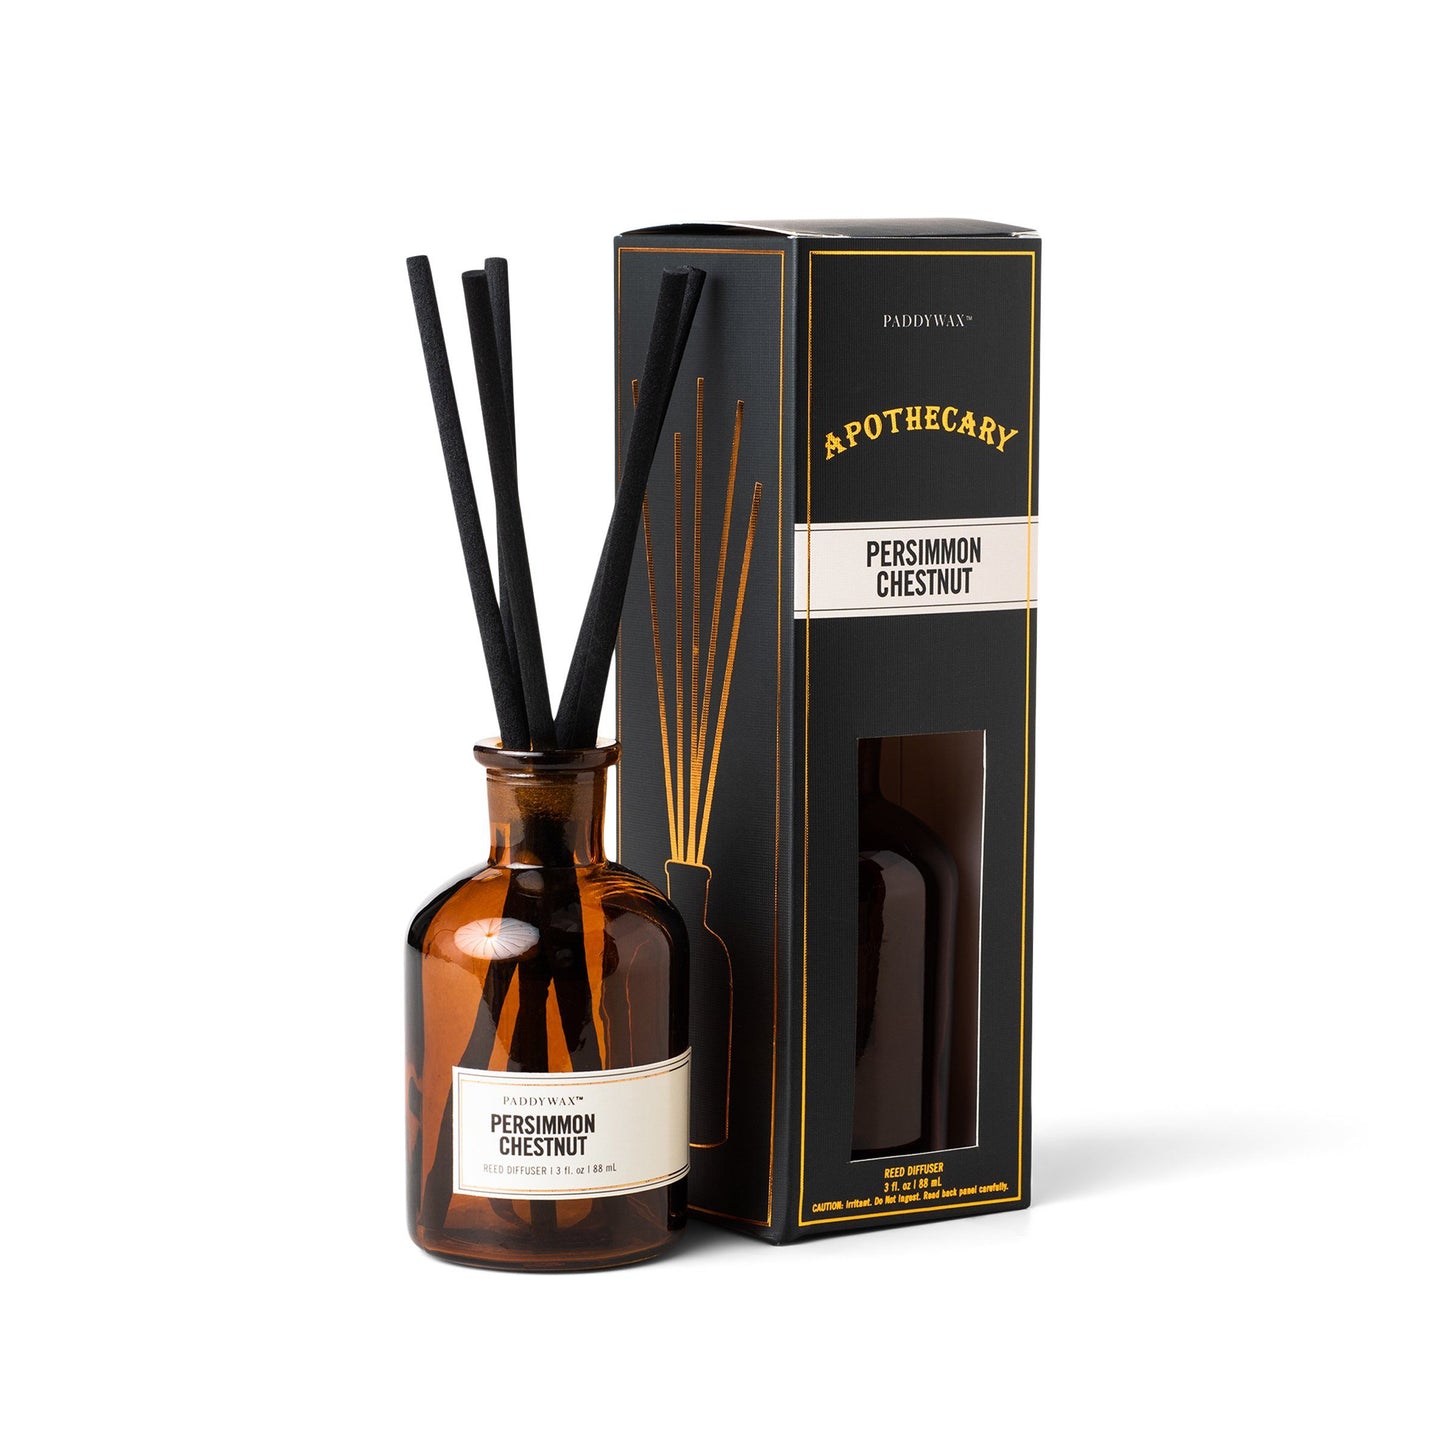 3 oz brown glass apothecary bottle filled with diffuser sticks; pictured next to the black packaging